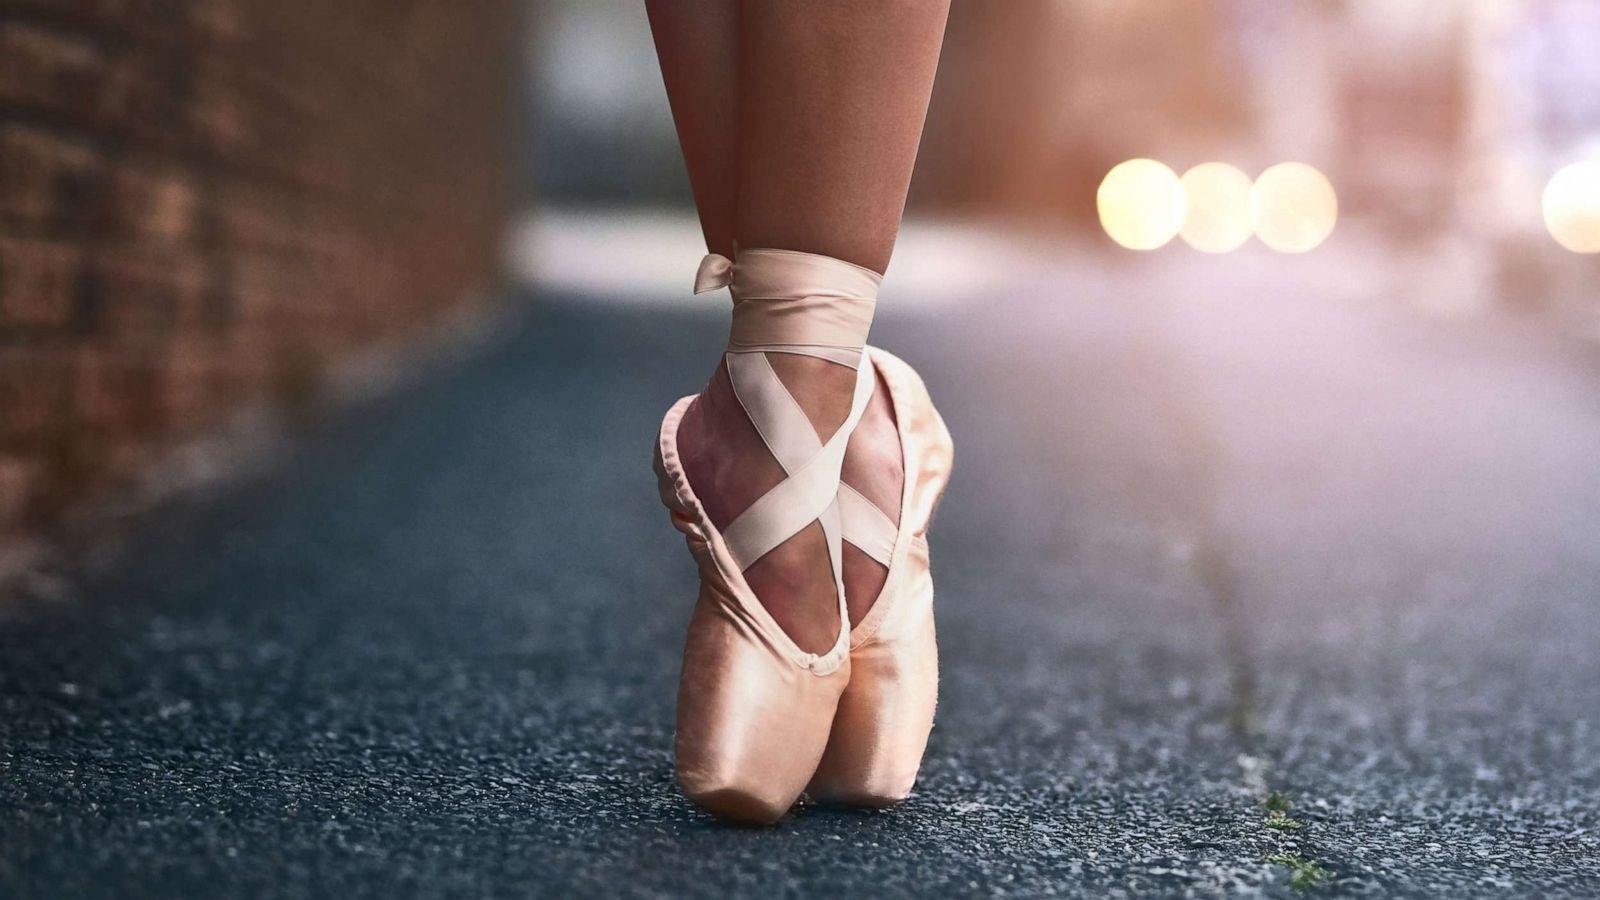 Ballet Pointe Shoes Wallpapers - Top Free Ballet Pointe Shoes ...